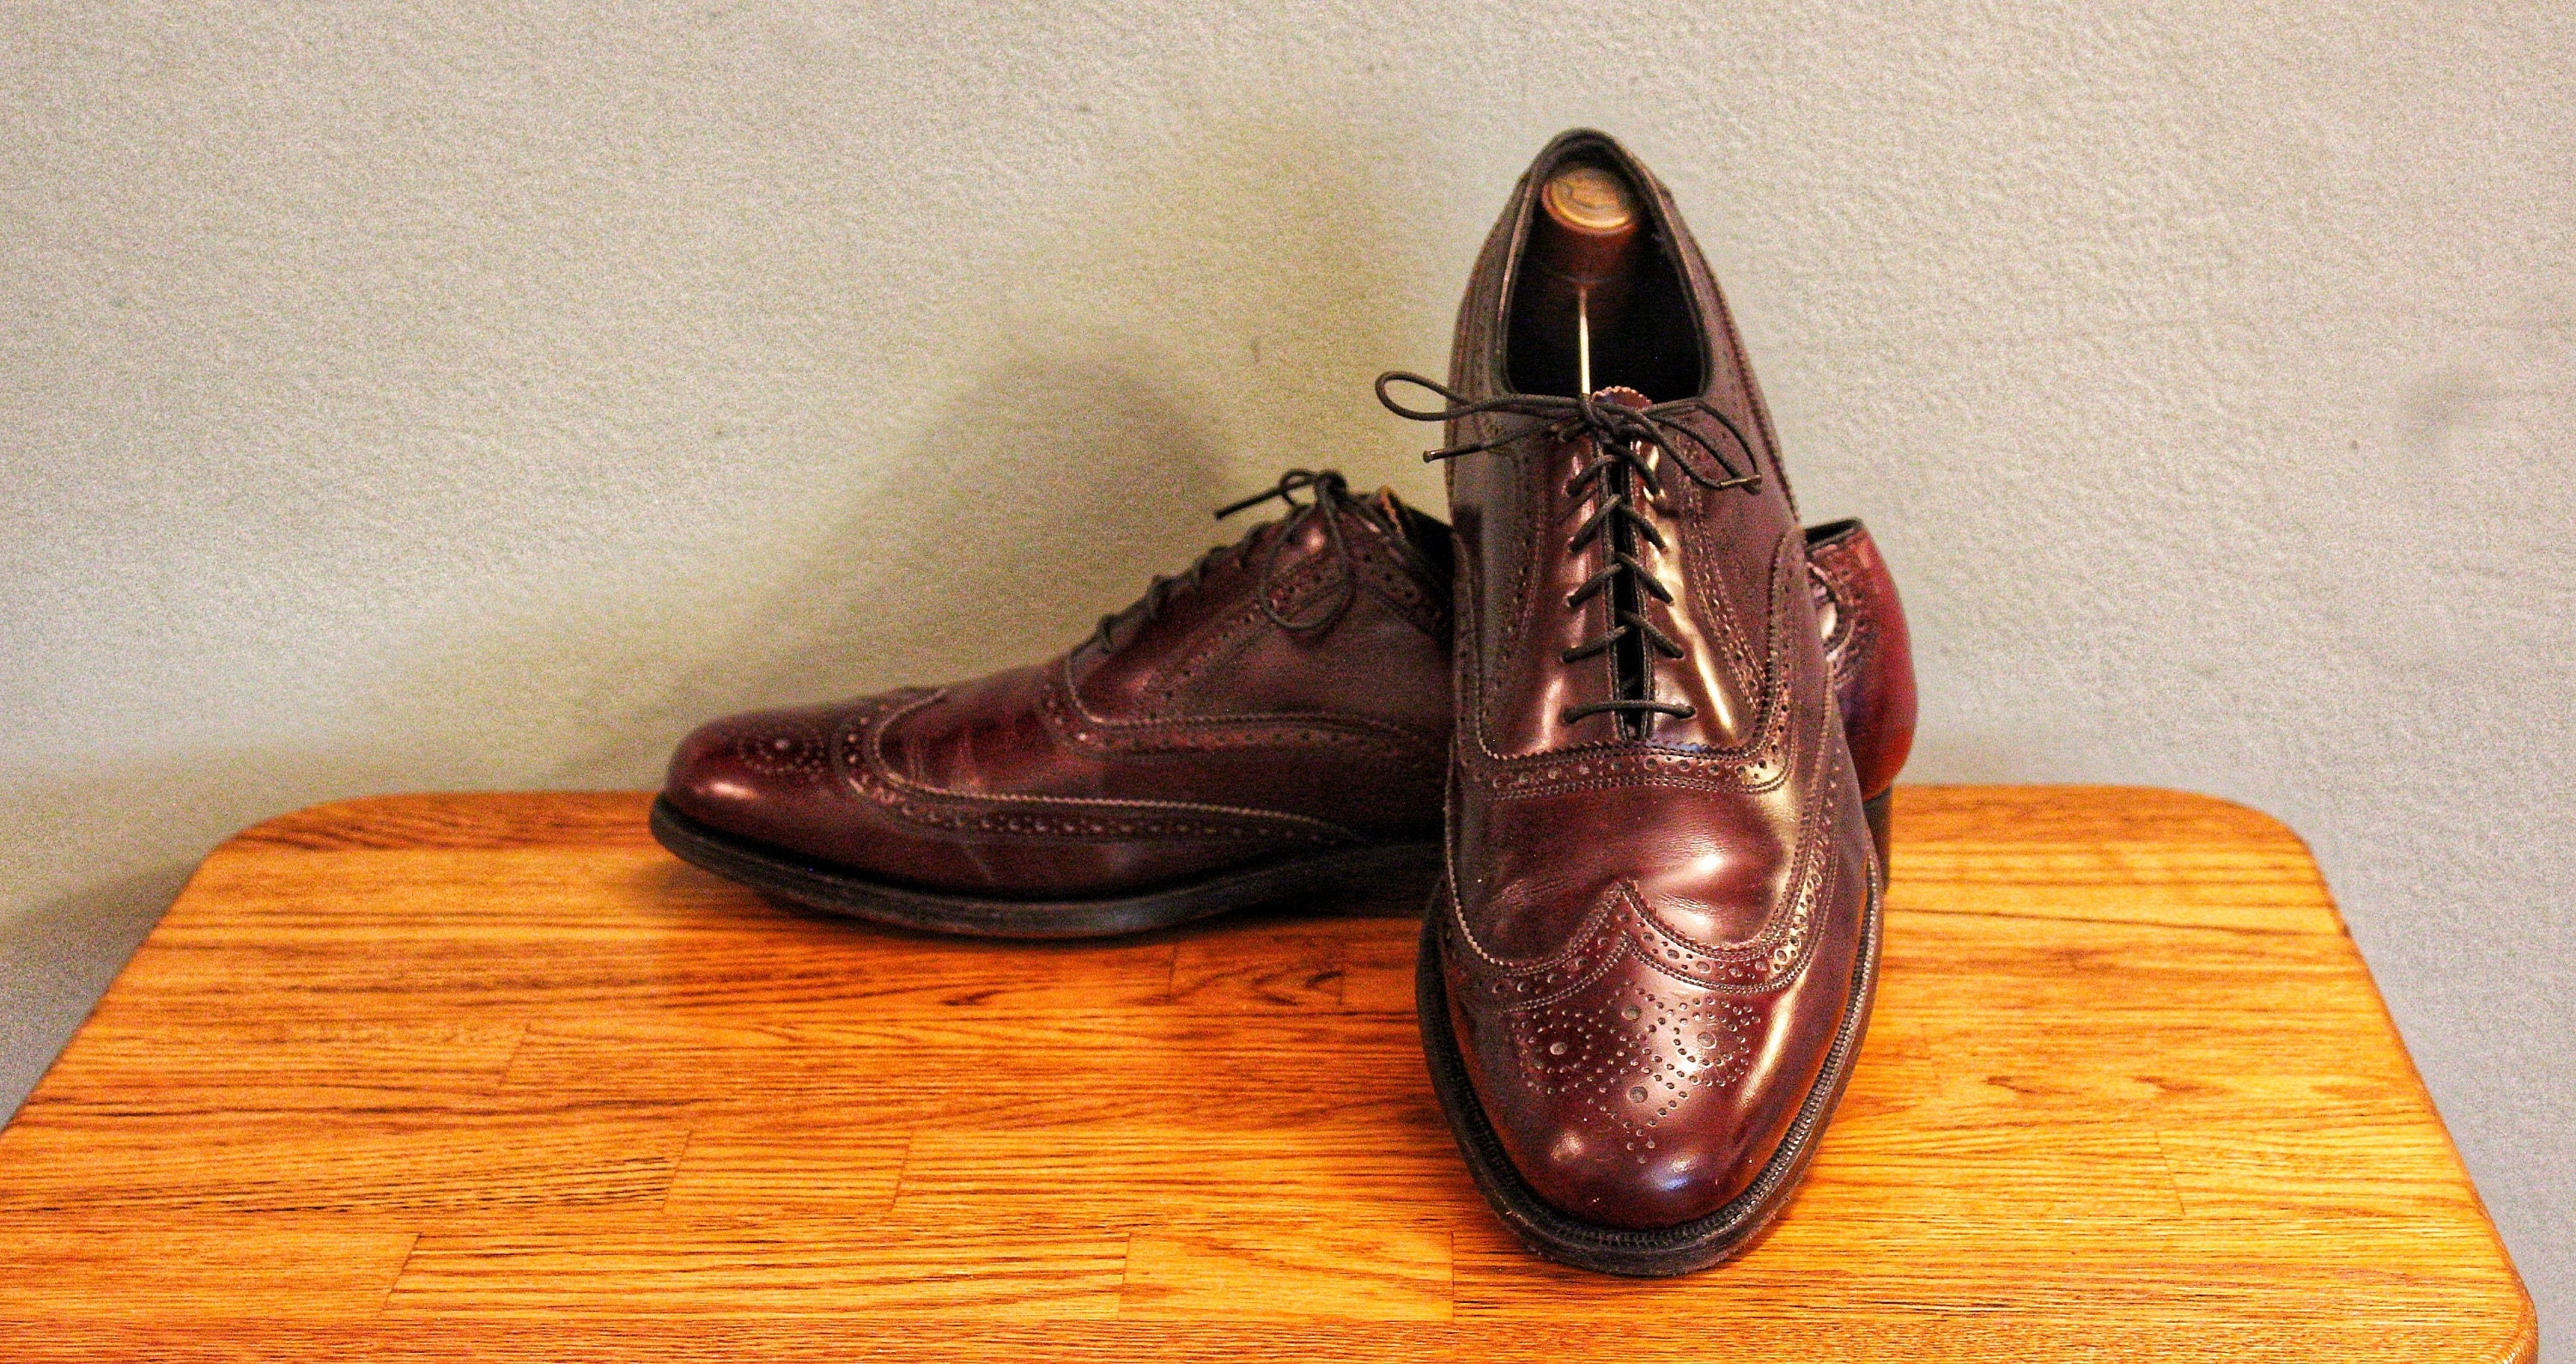 1960's Cordovan Oxford Wing Tip Vintage Men's Shoes from